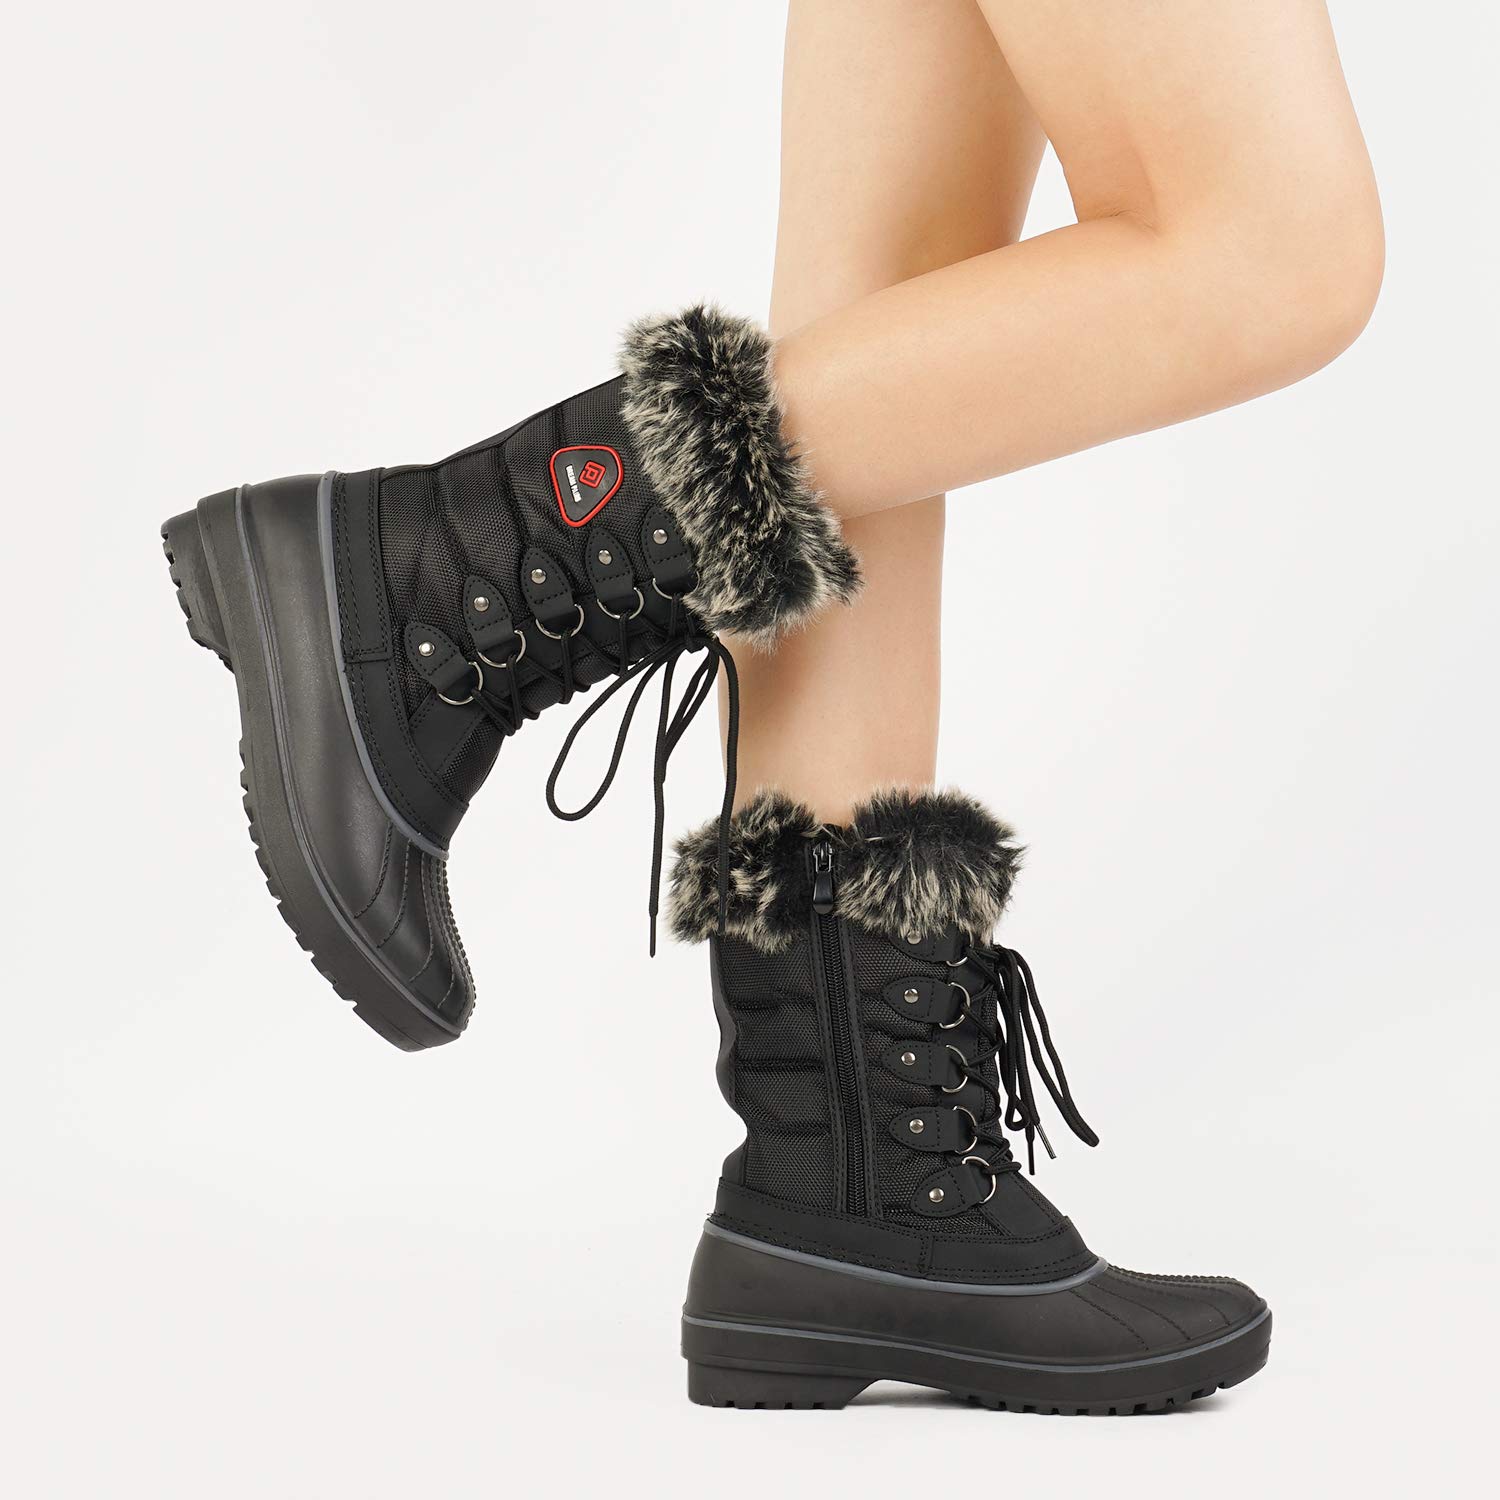 Review of DREAM PAIRS Women's Warm Faux Fur Lined Mid Calf Winter Snow Boots